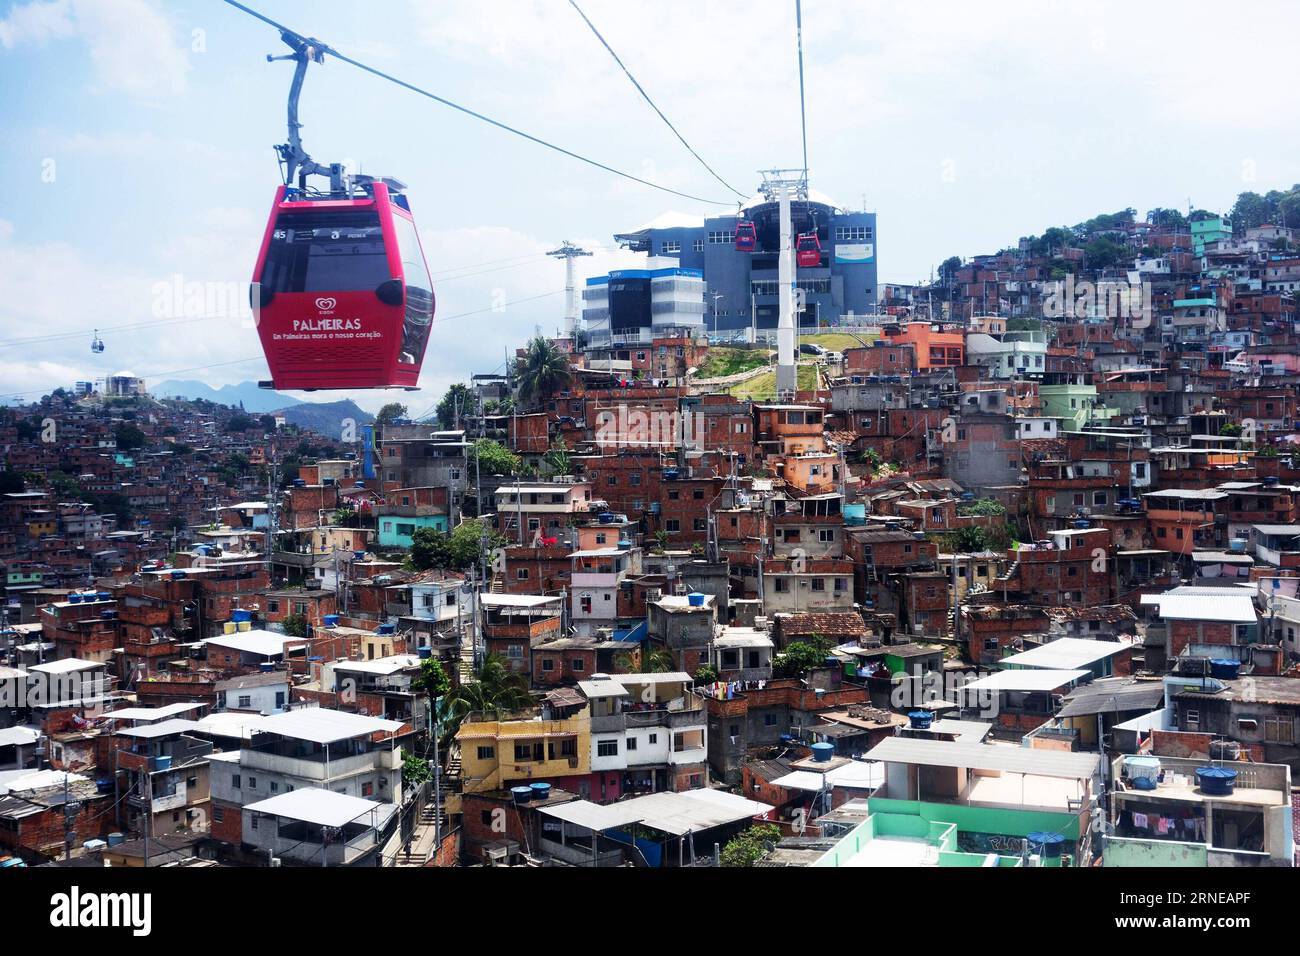 This file photo shows a view of the Complexo do Alemao group of favelas in the north zone of Rio de Janeiroin, Brazil on Feb. 10, 2015. The Rio 2016 Olympic Games will be held from August 5 to 21. )(wll) (SP)FILES-BRAZIL-RIO DE JANEIRO-OLYMPICS-CITY XuxZijian PUBLICATIONxNOTxINxCHN   This File Photo Shows a View of The Complexo Do Alemao Group of Favelas in The North Zone of Rio de  Brazil ON Feb 10 2015 The Rio 2016 Olympic Games will Be Hero from August 5 to 21 wll SP Files Brazil Rio de Janeiro Olympics City XuxZijian PUBLICATIONxNOTxINxCHN Stock Photo